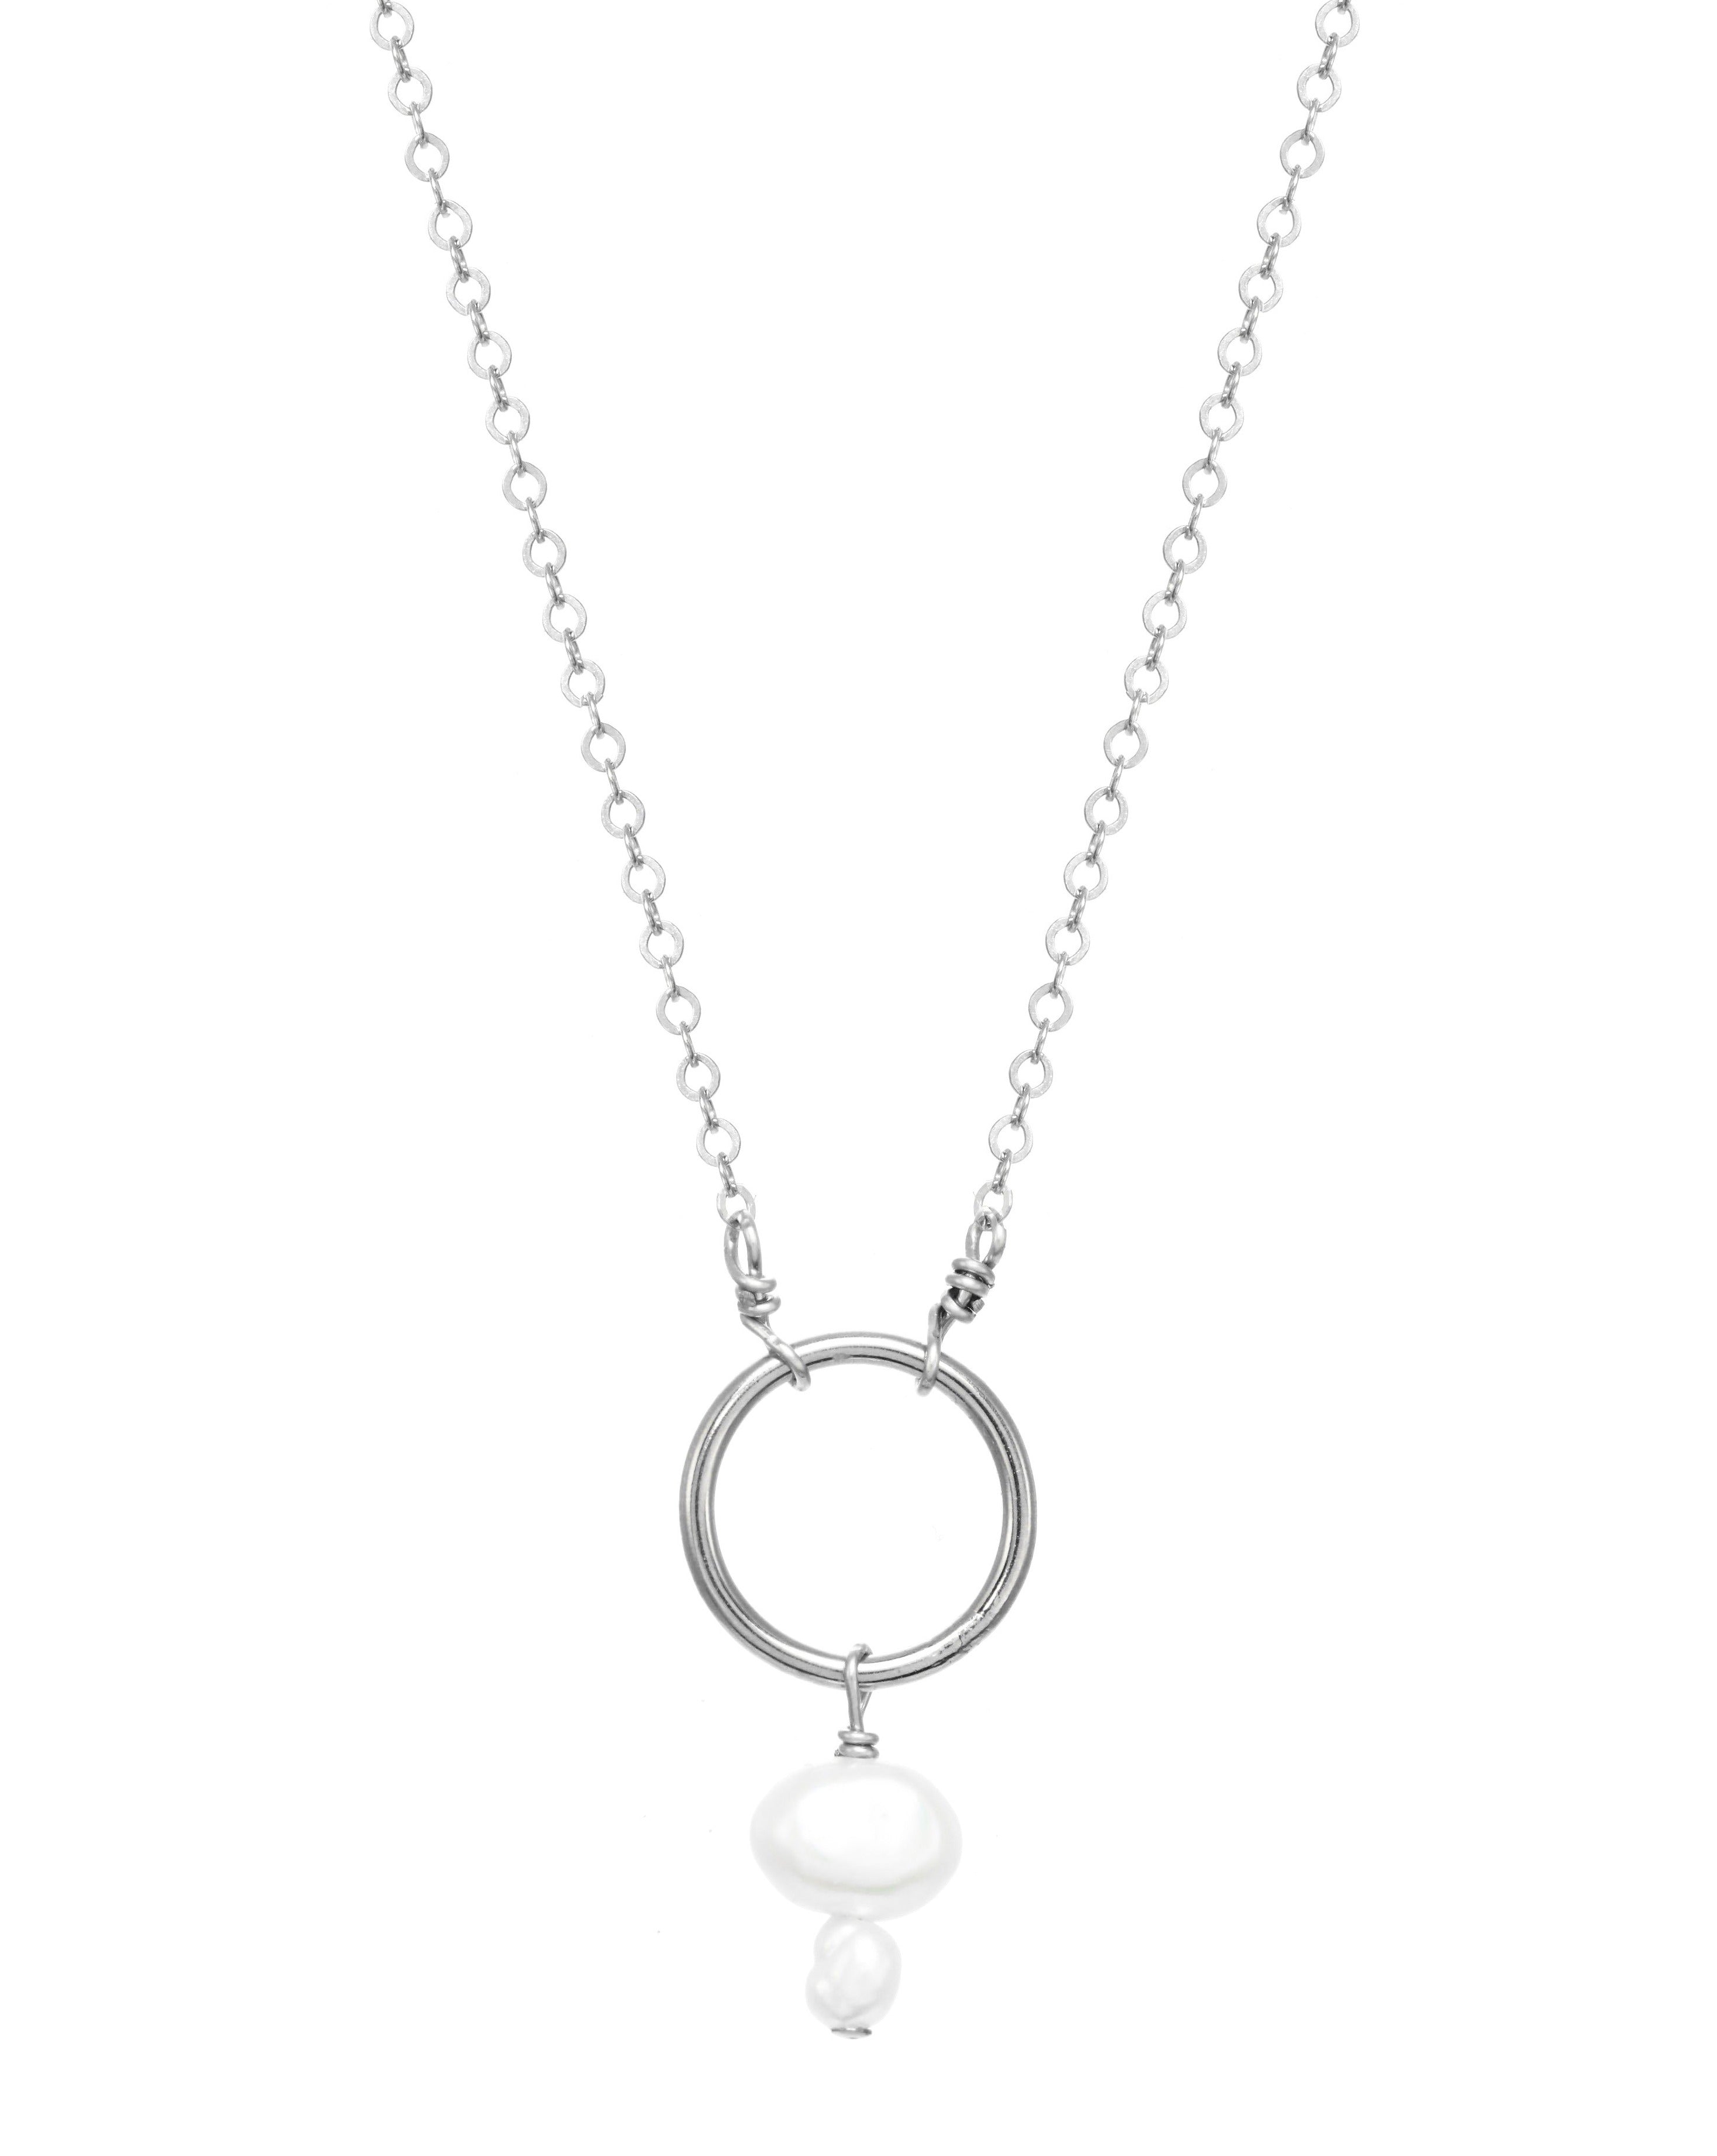 Lahela Necklace by KOZAKH. A 16 to 18 inch adjustable length necklace, crafted in Sterling Silver, featuring a 4-5mm White irregular Pearl and a 3-4mm white freshwater Pearl.